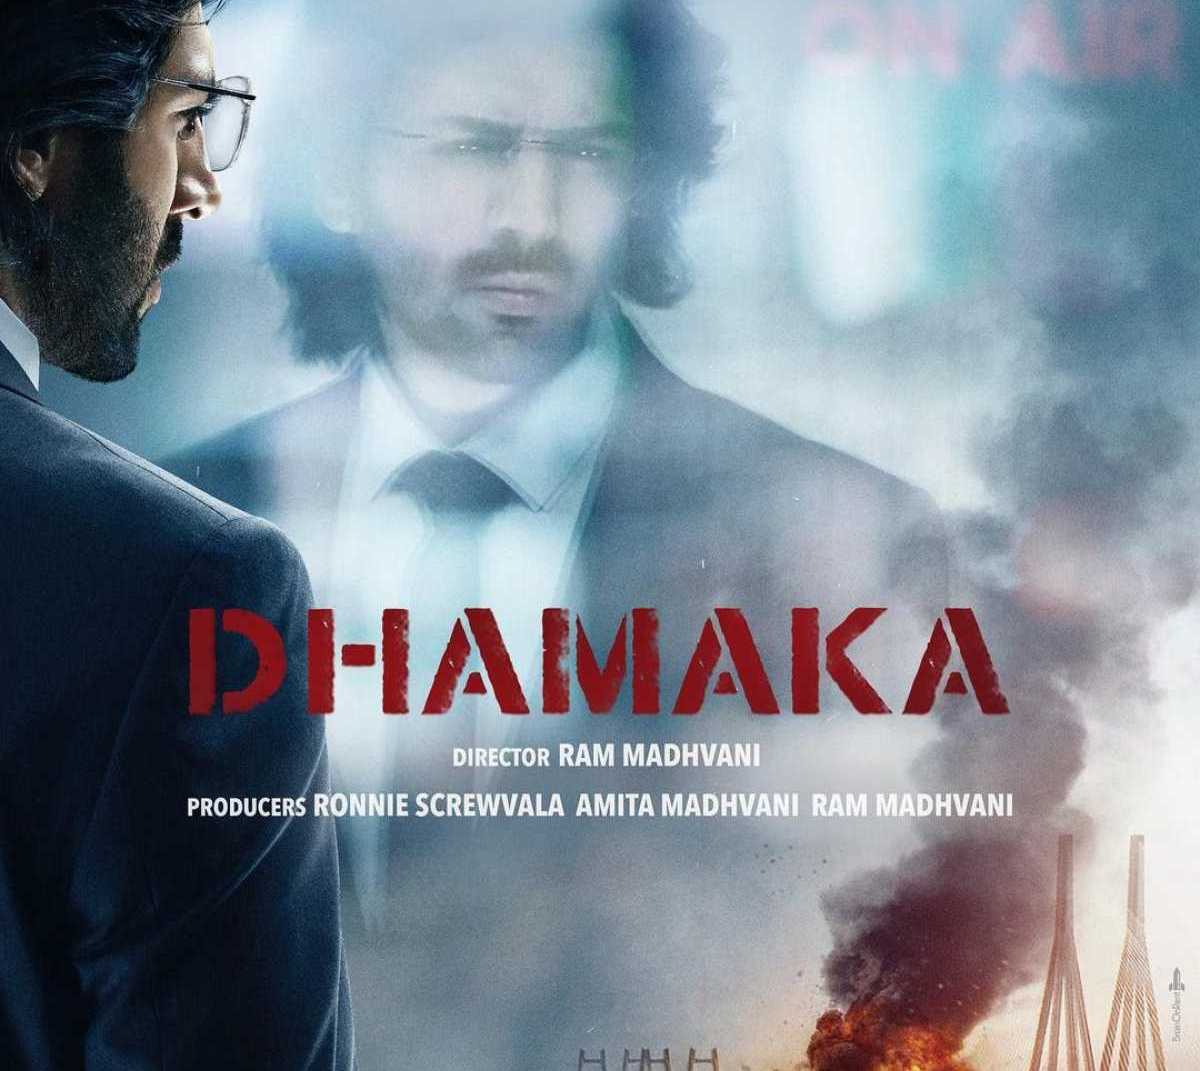 dhamaka movie review and rating